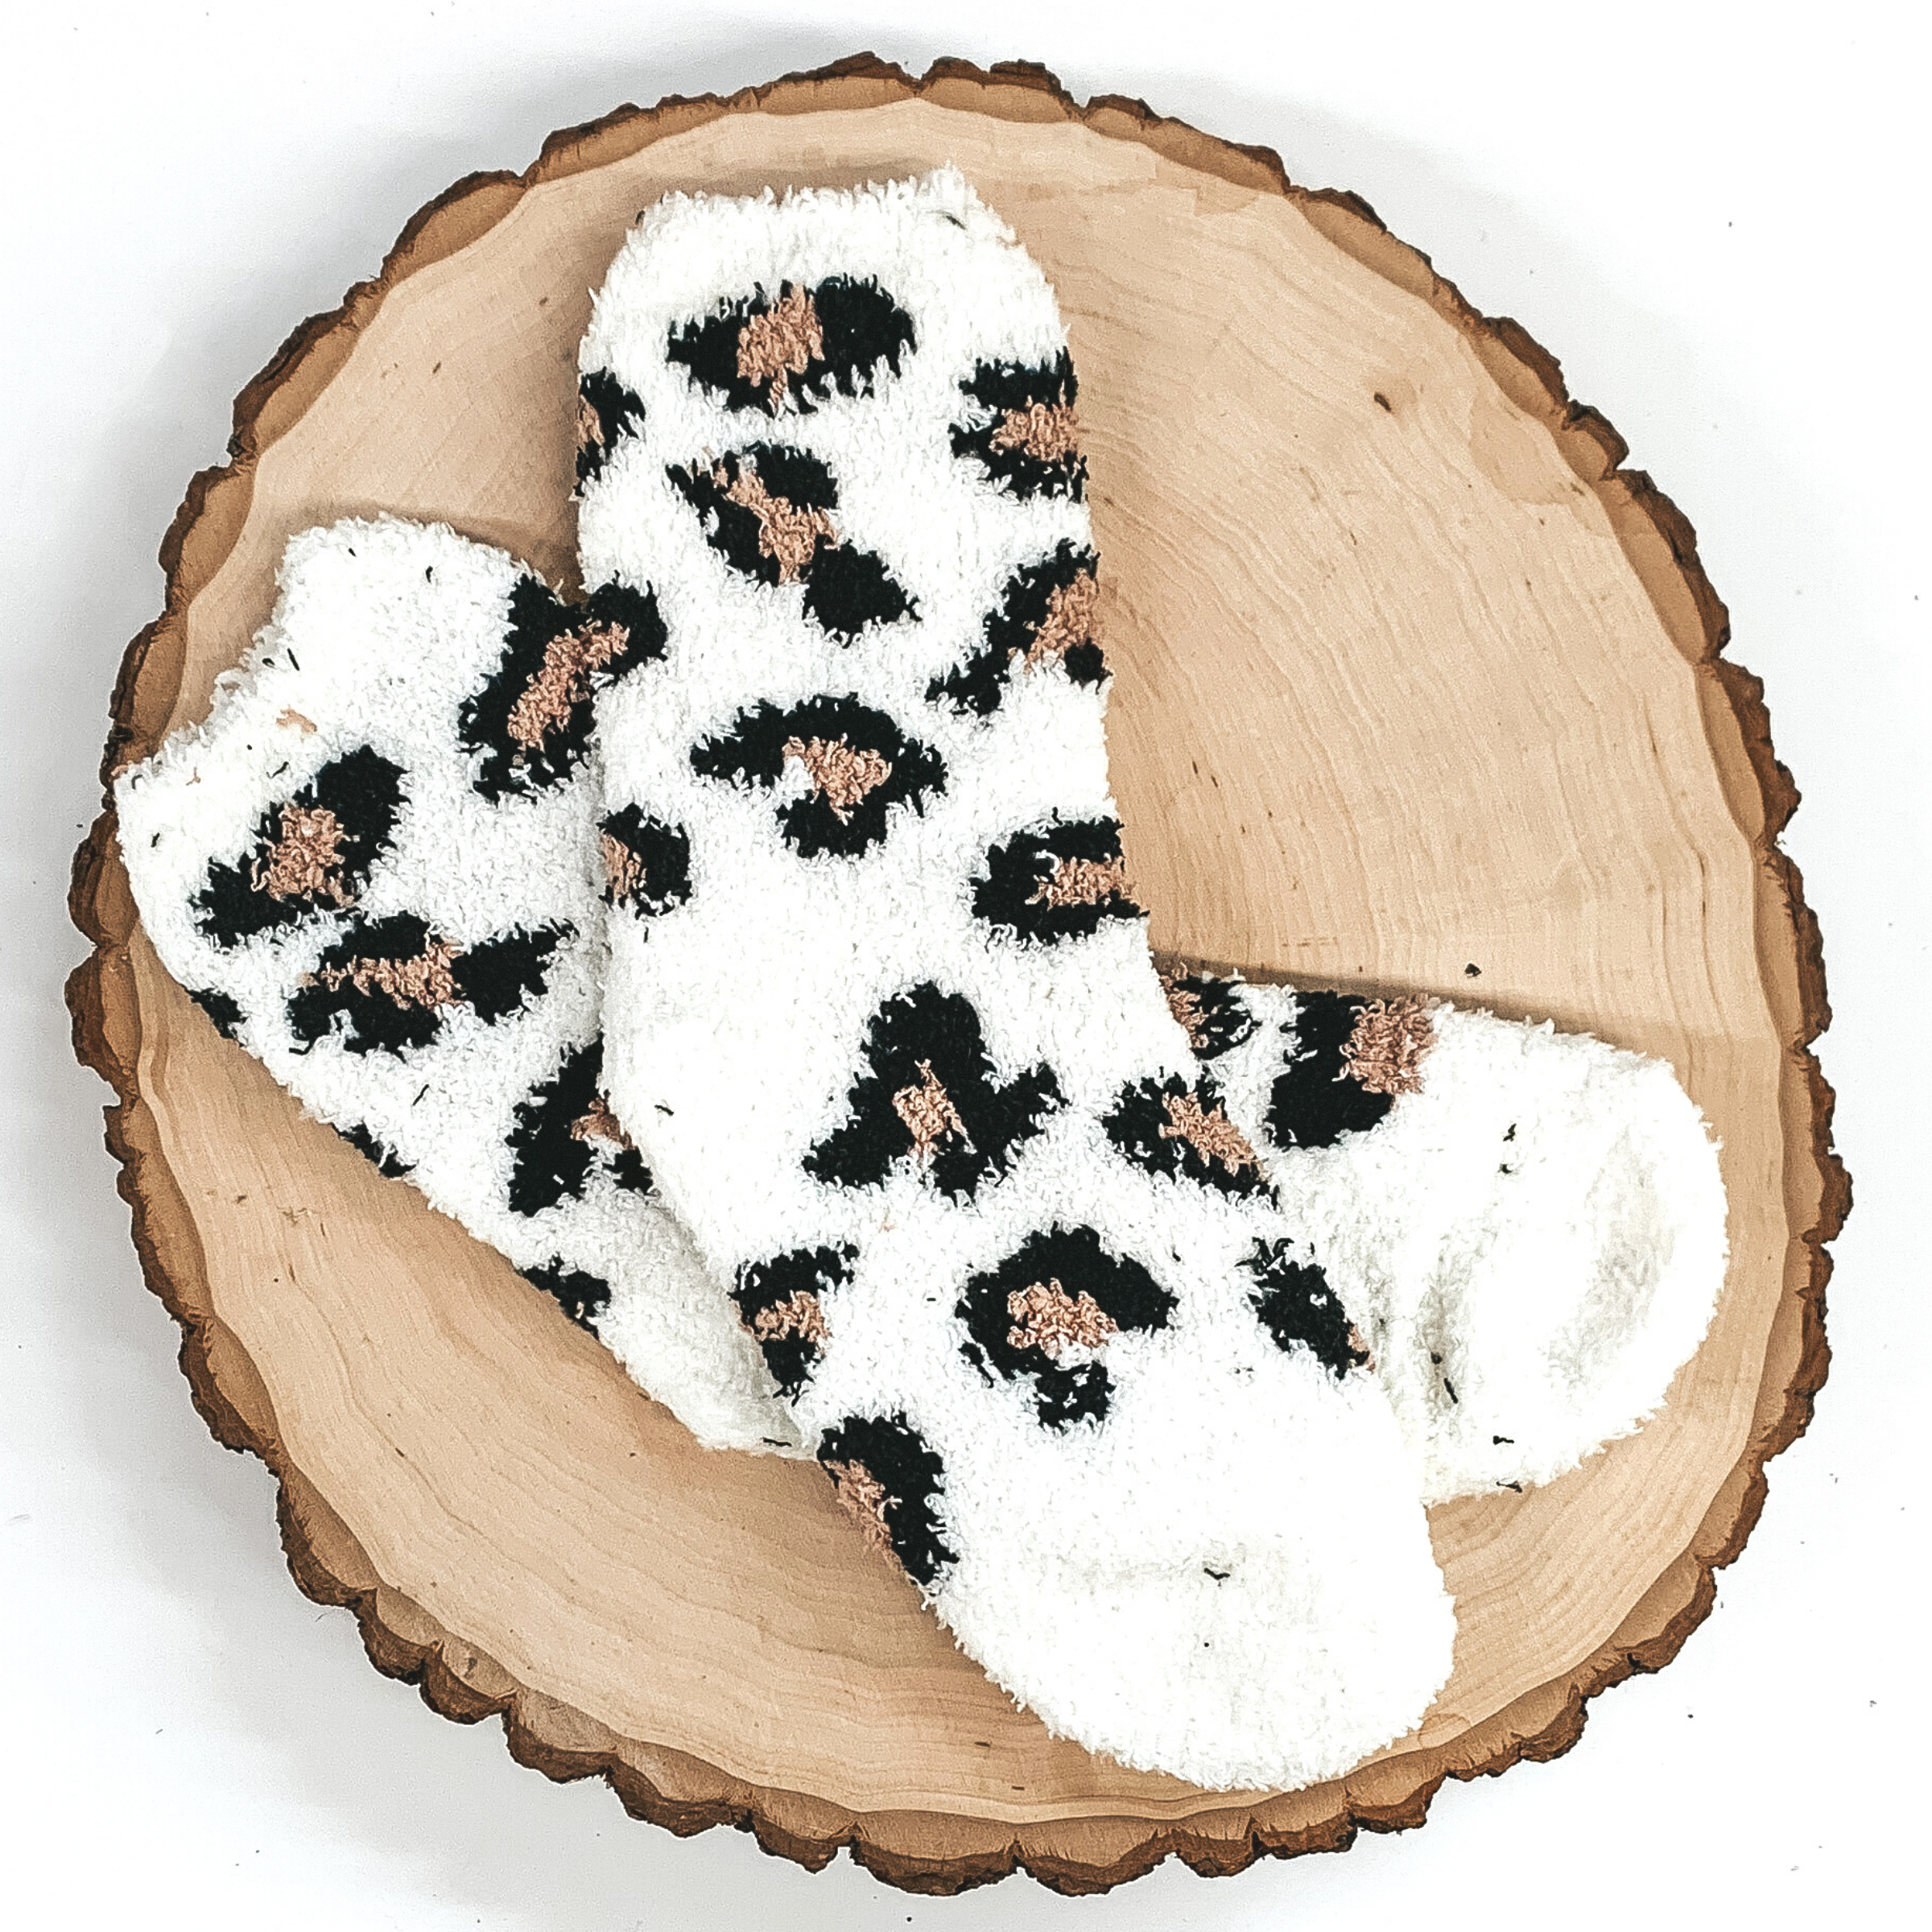 Fuzzy white socks with black and tan leopard print. These socks are pictured laying on a piece of wood that is on a white background.